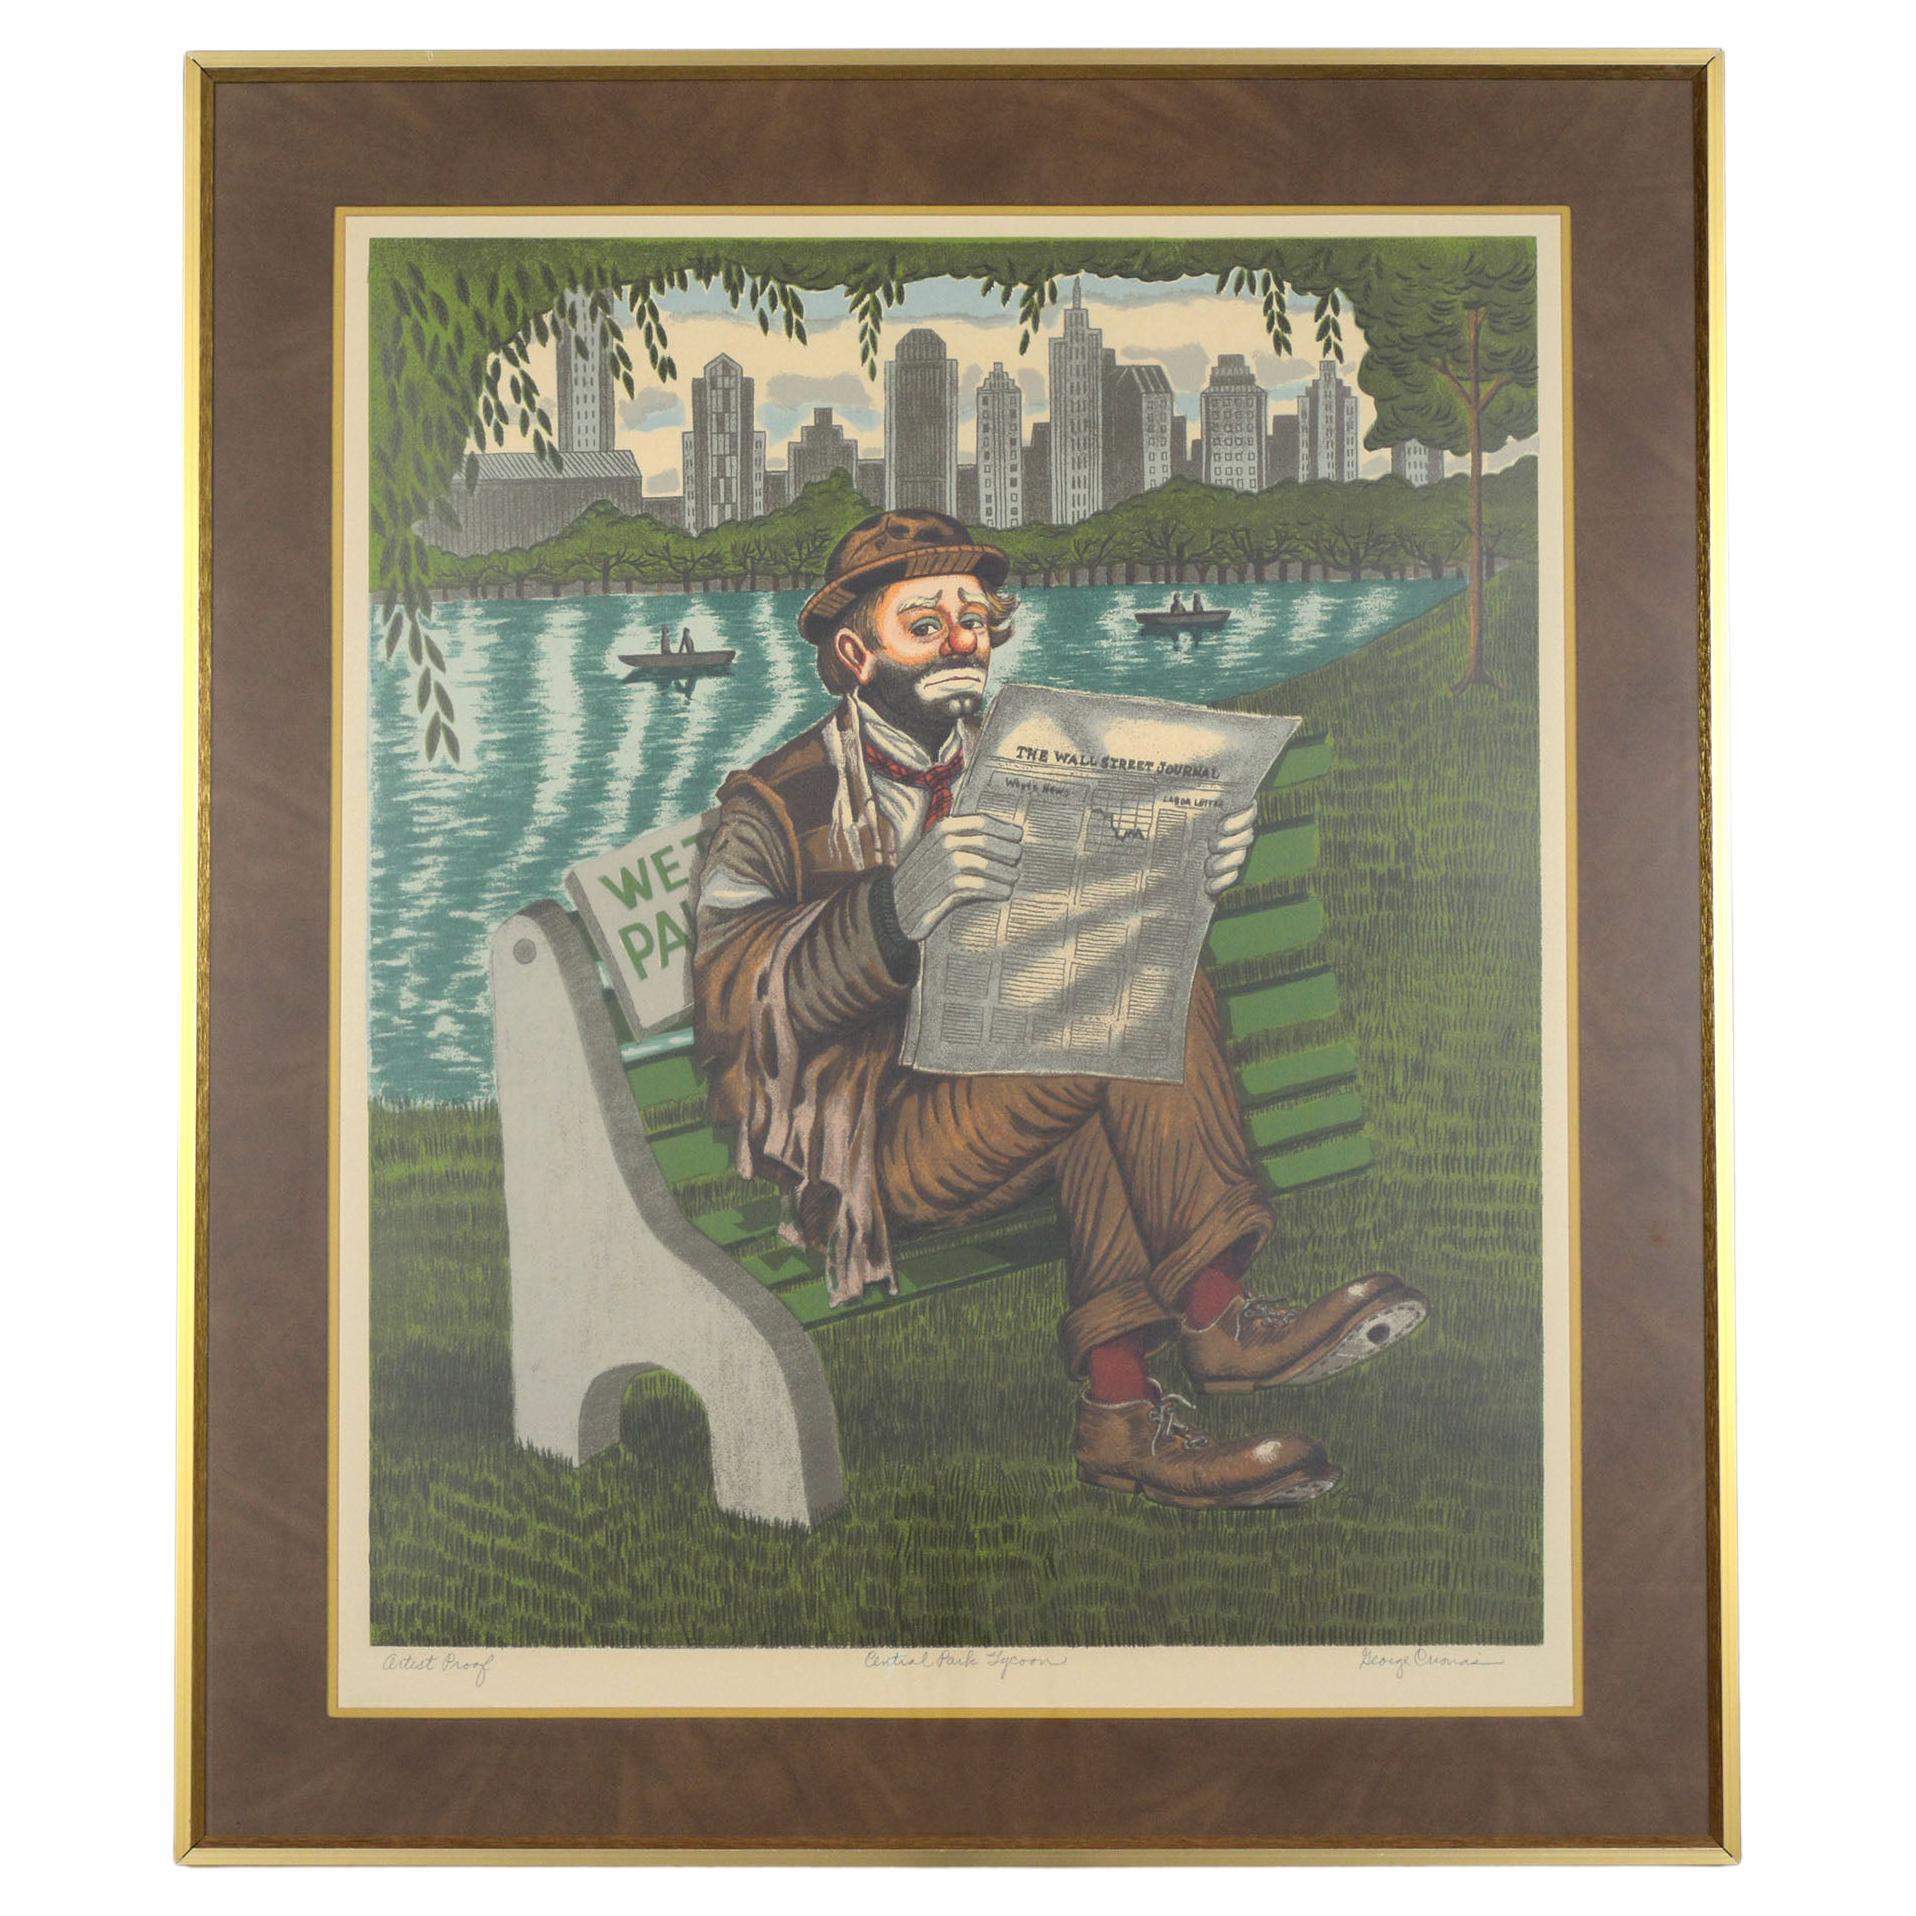 George Crionas' "Central Park Tycoon" Lithograph